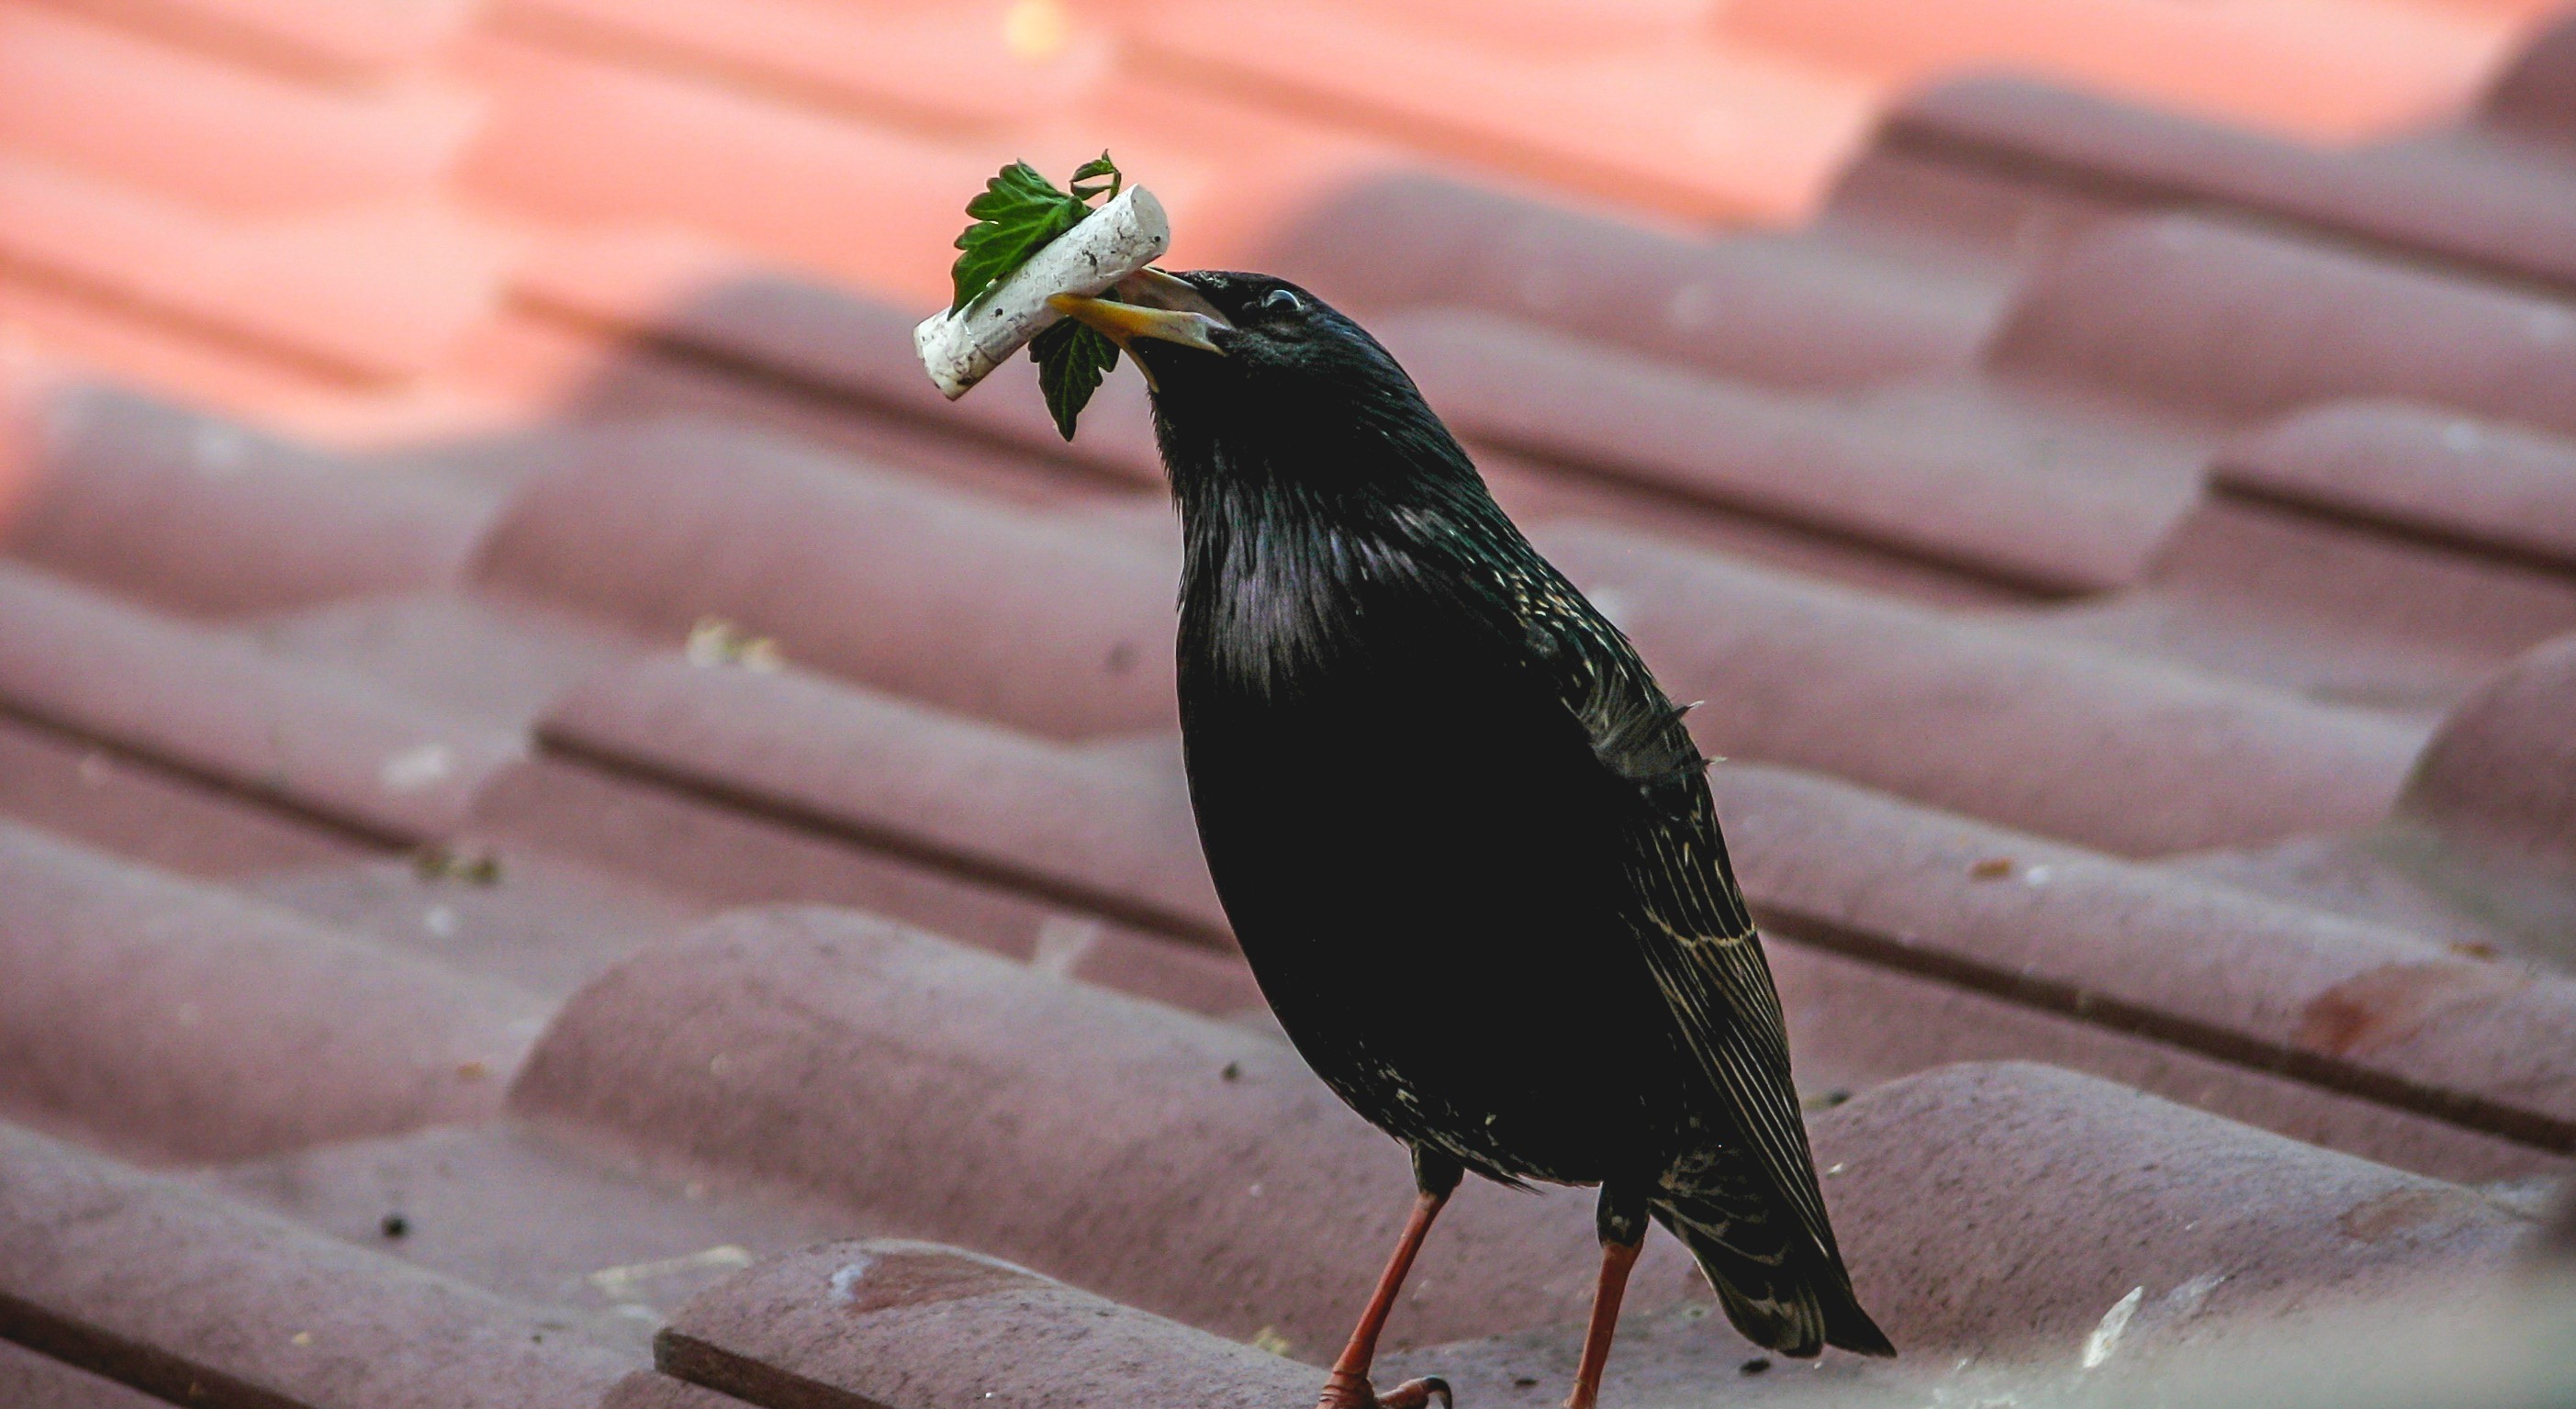 A bird with a cigarette butt in its mouth.